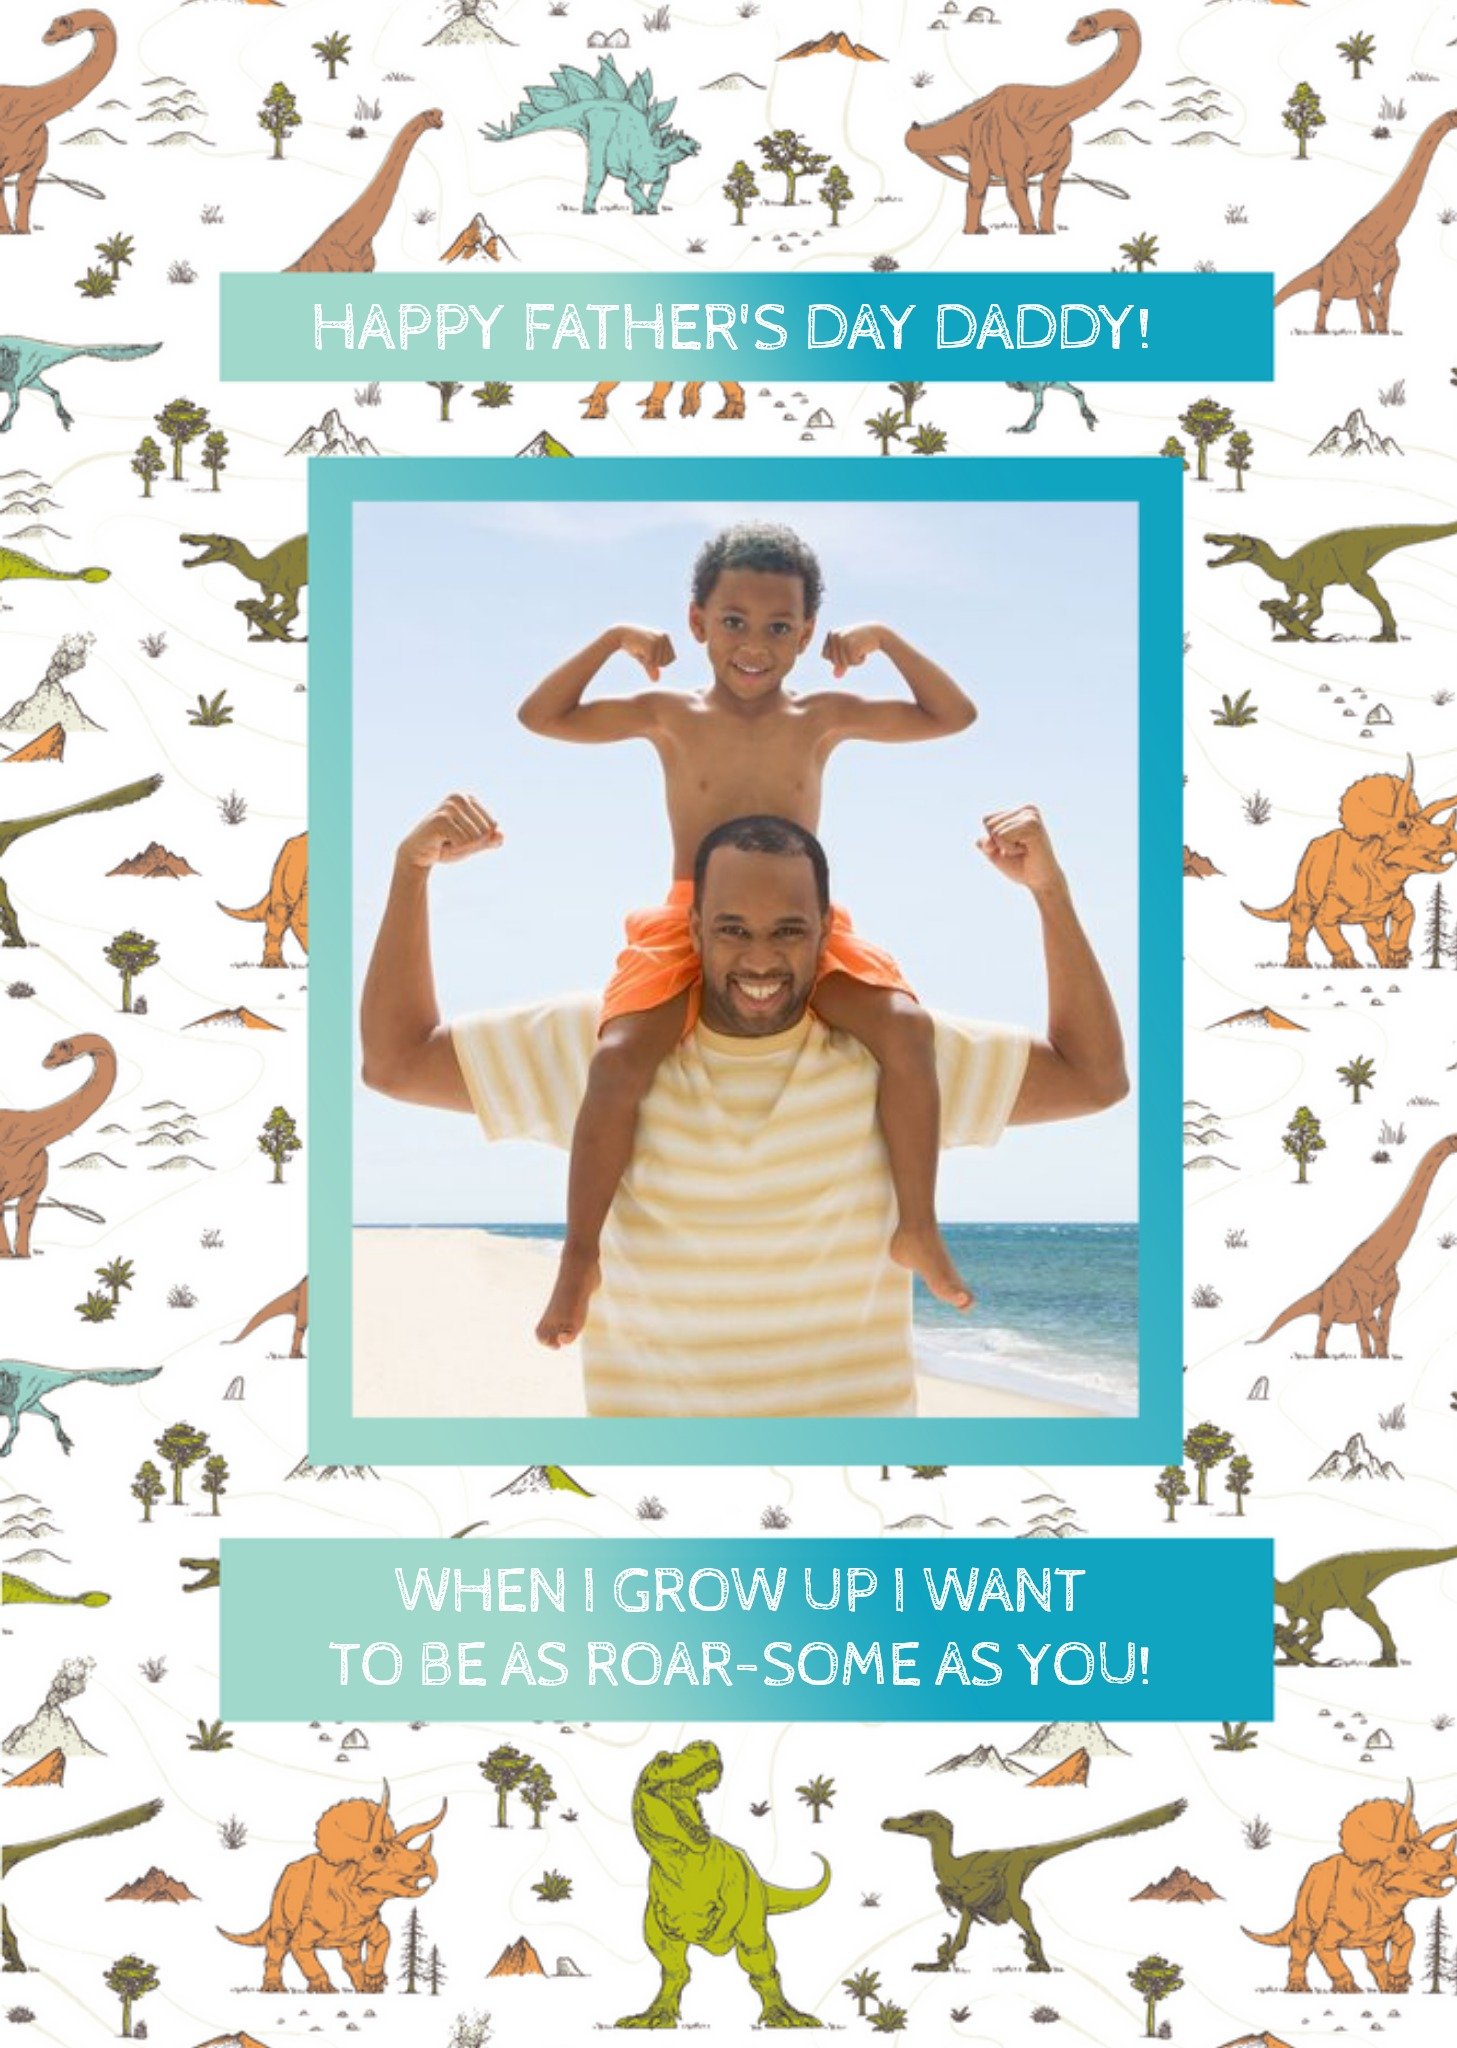 The Natural History Museum Cartoon Dinosaurs Be As Roar-Some As You Father's Day Photo Card Ecard